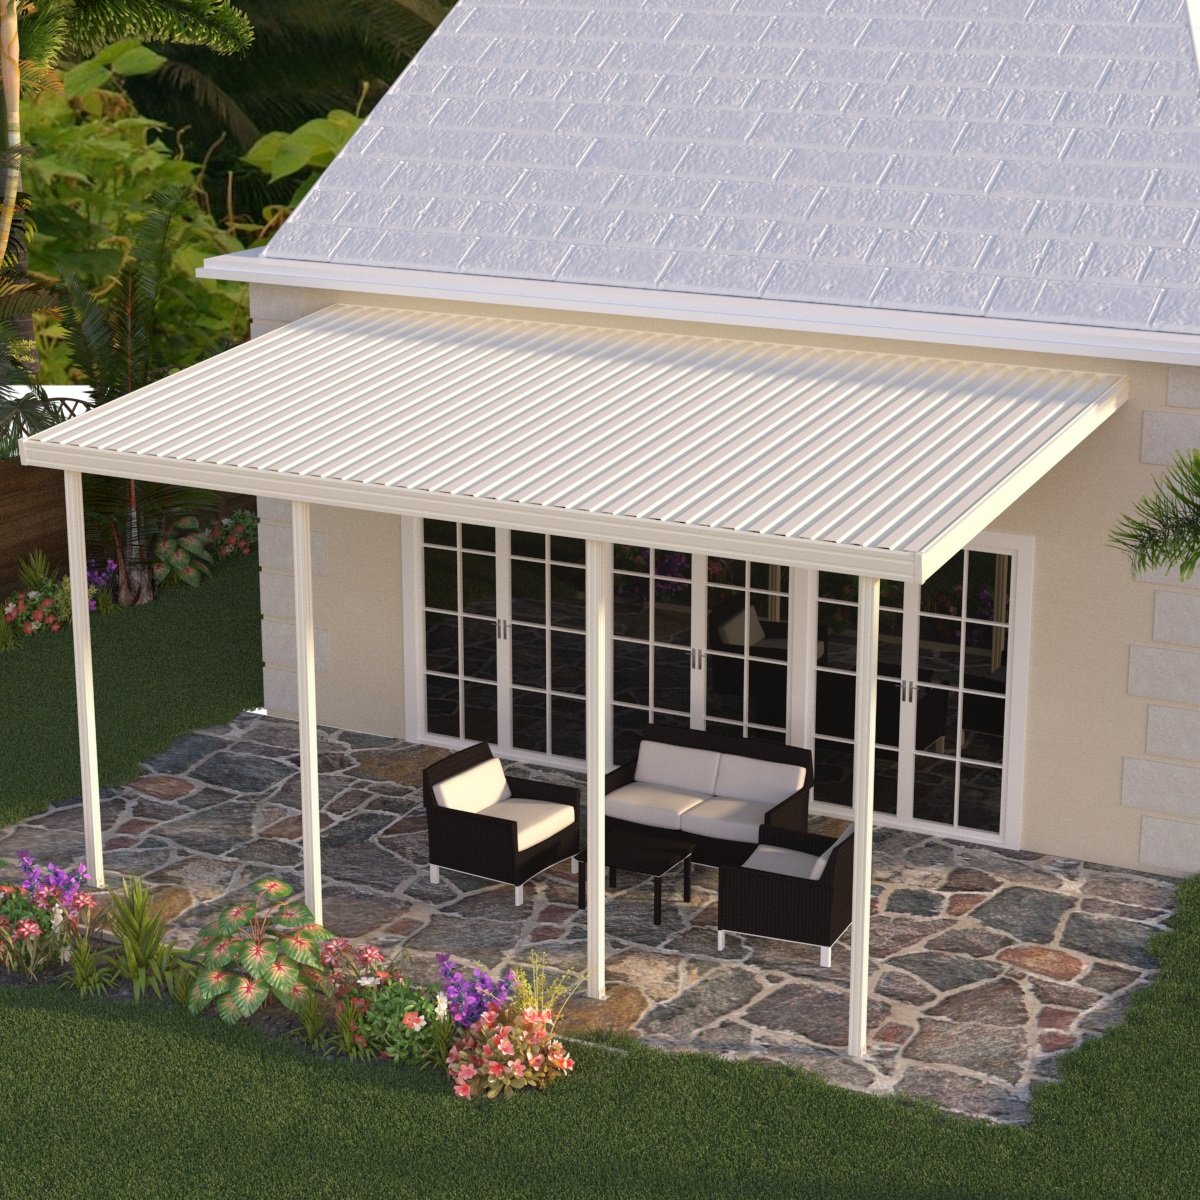 08 ft. Deep x 36 ft. Wide Ivory Attached Aluminum Patio Cover -5 Posts - (10lb Low Snow Area)